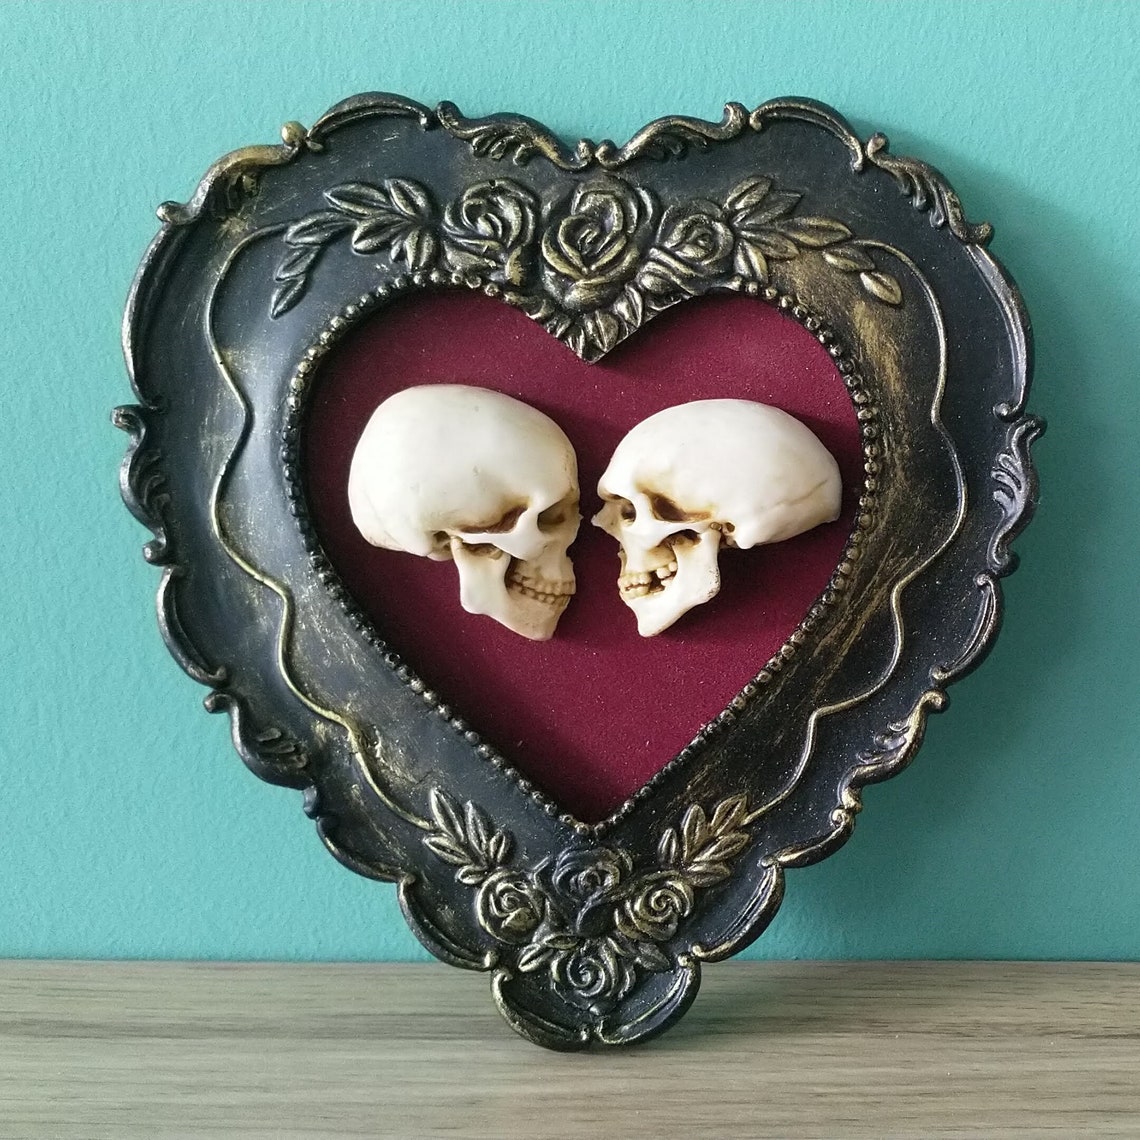 Miniature Realistic Human Skull With Heart-shaped Frame